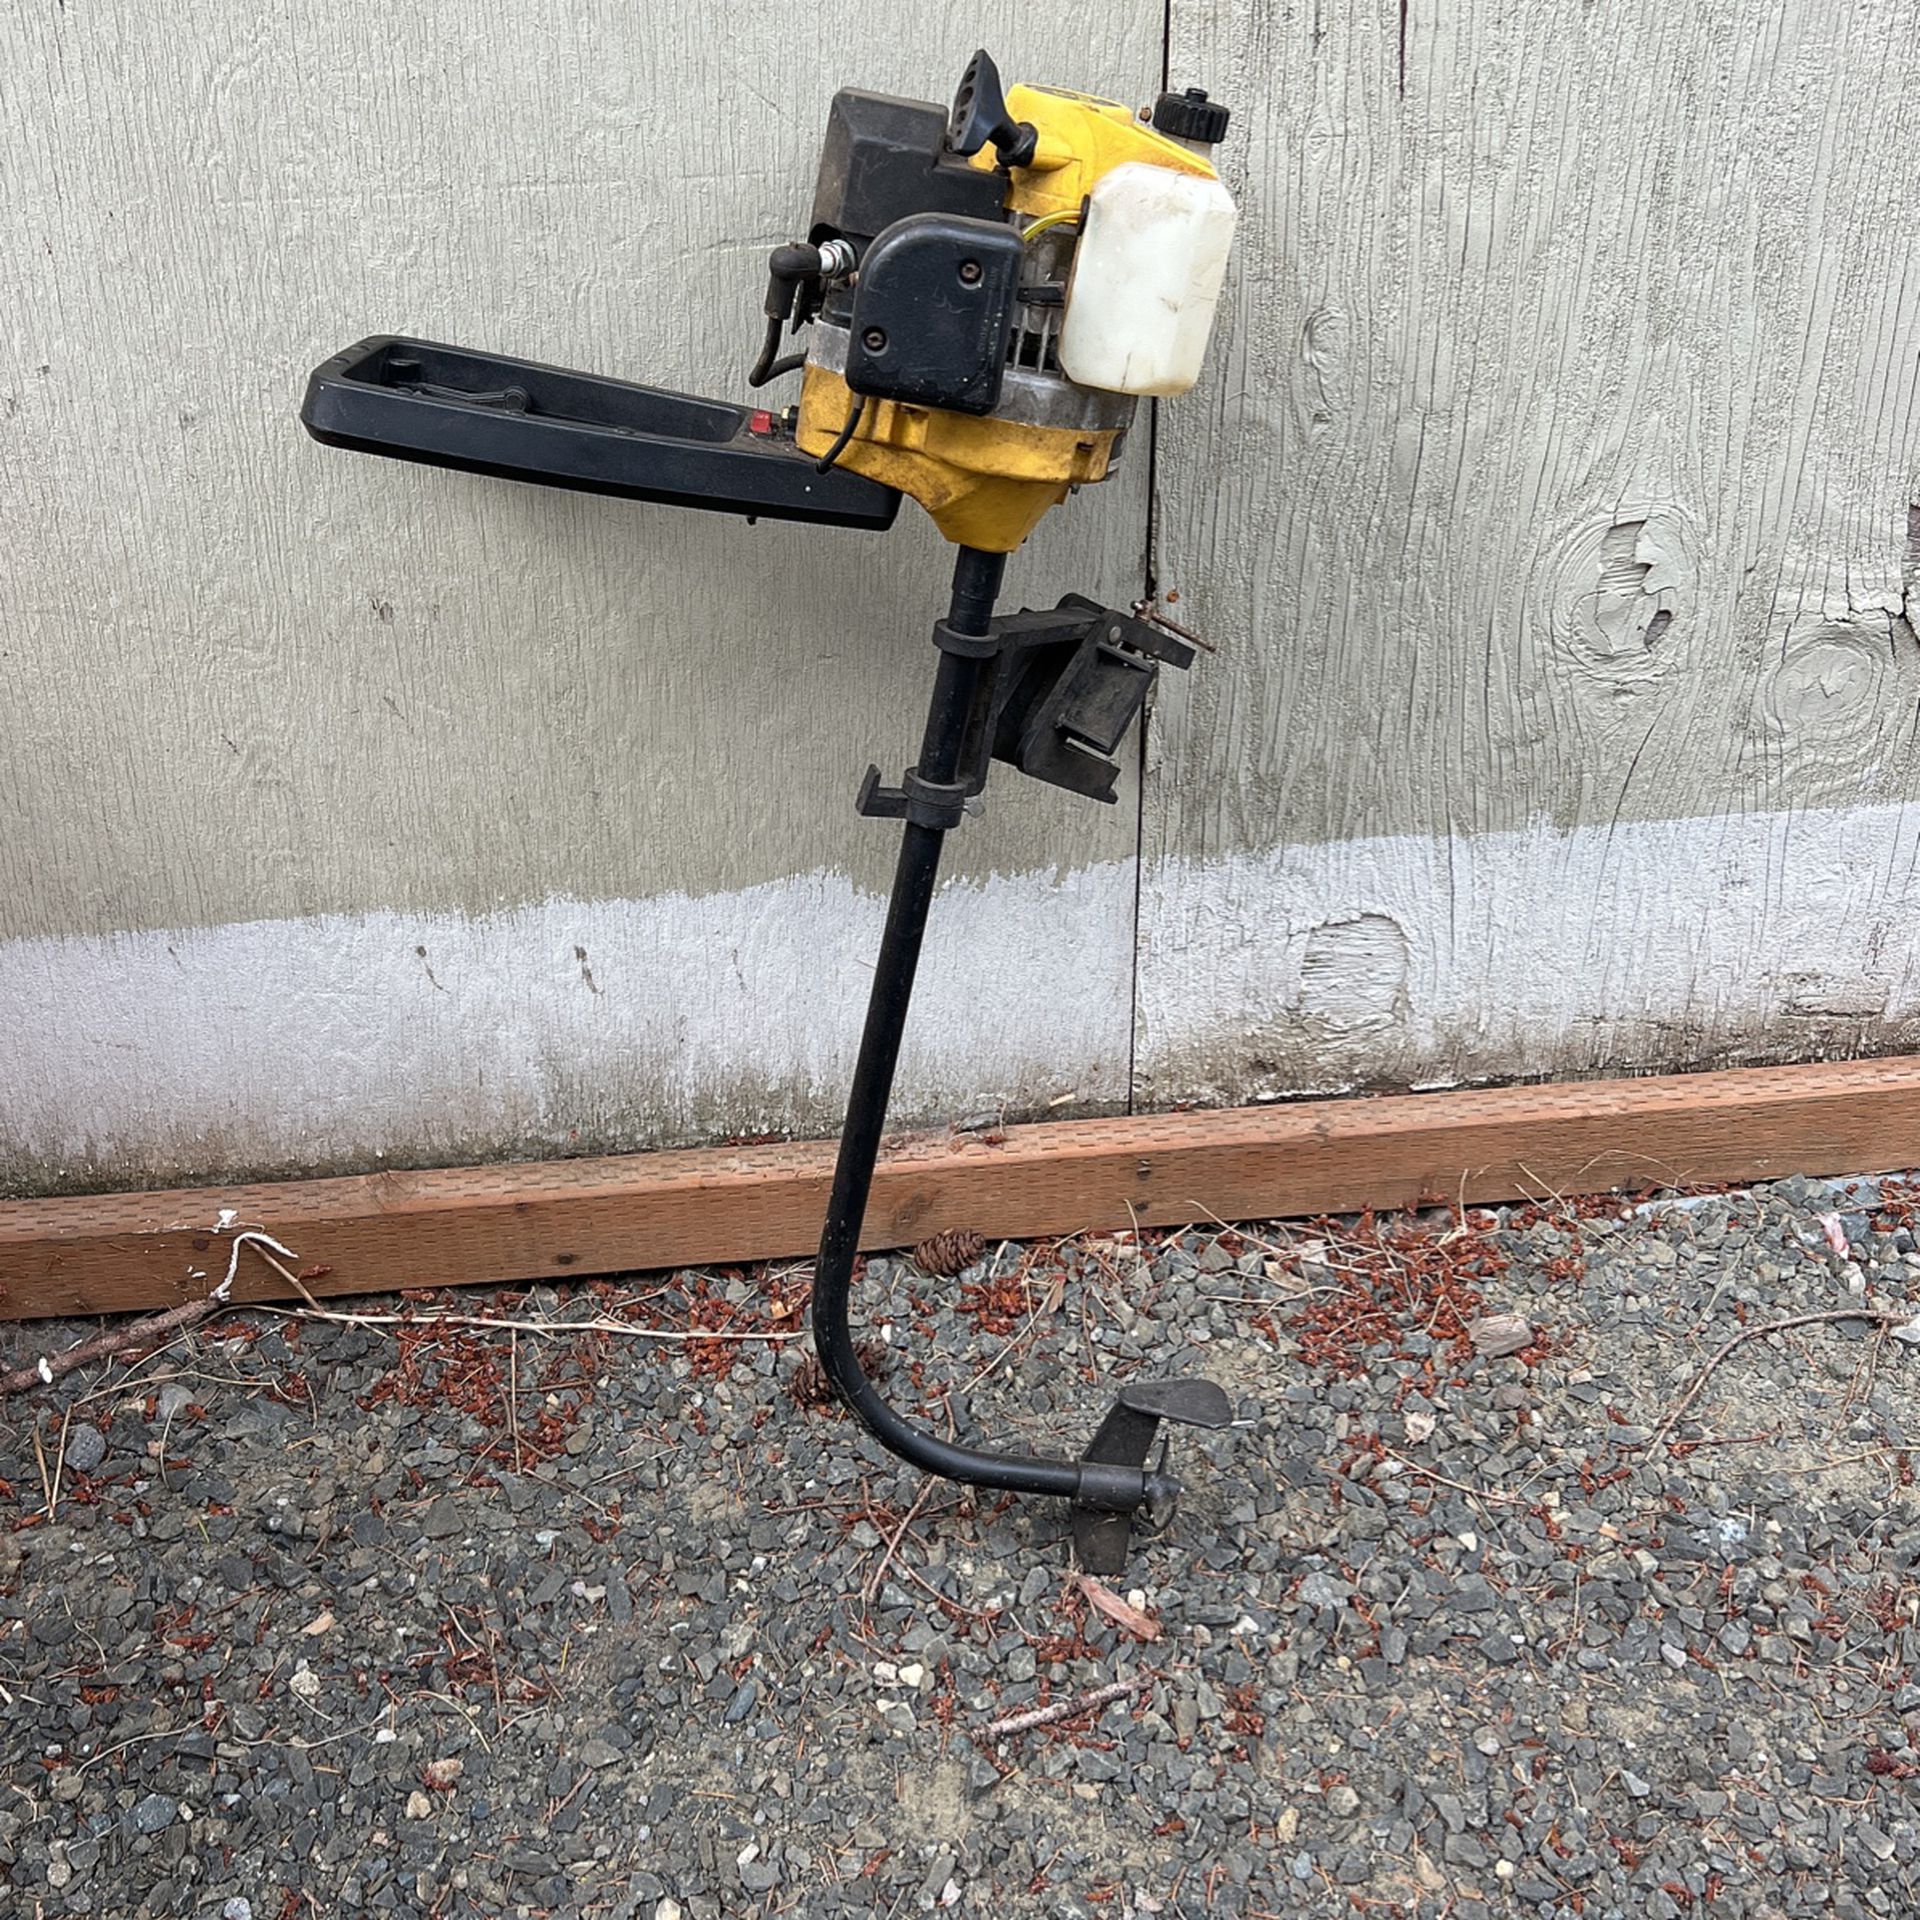 Bumble Bee Outboard Motor